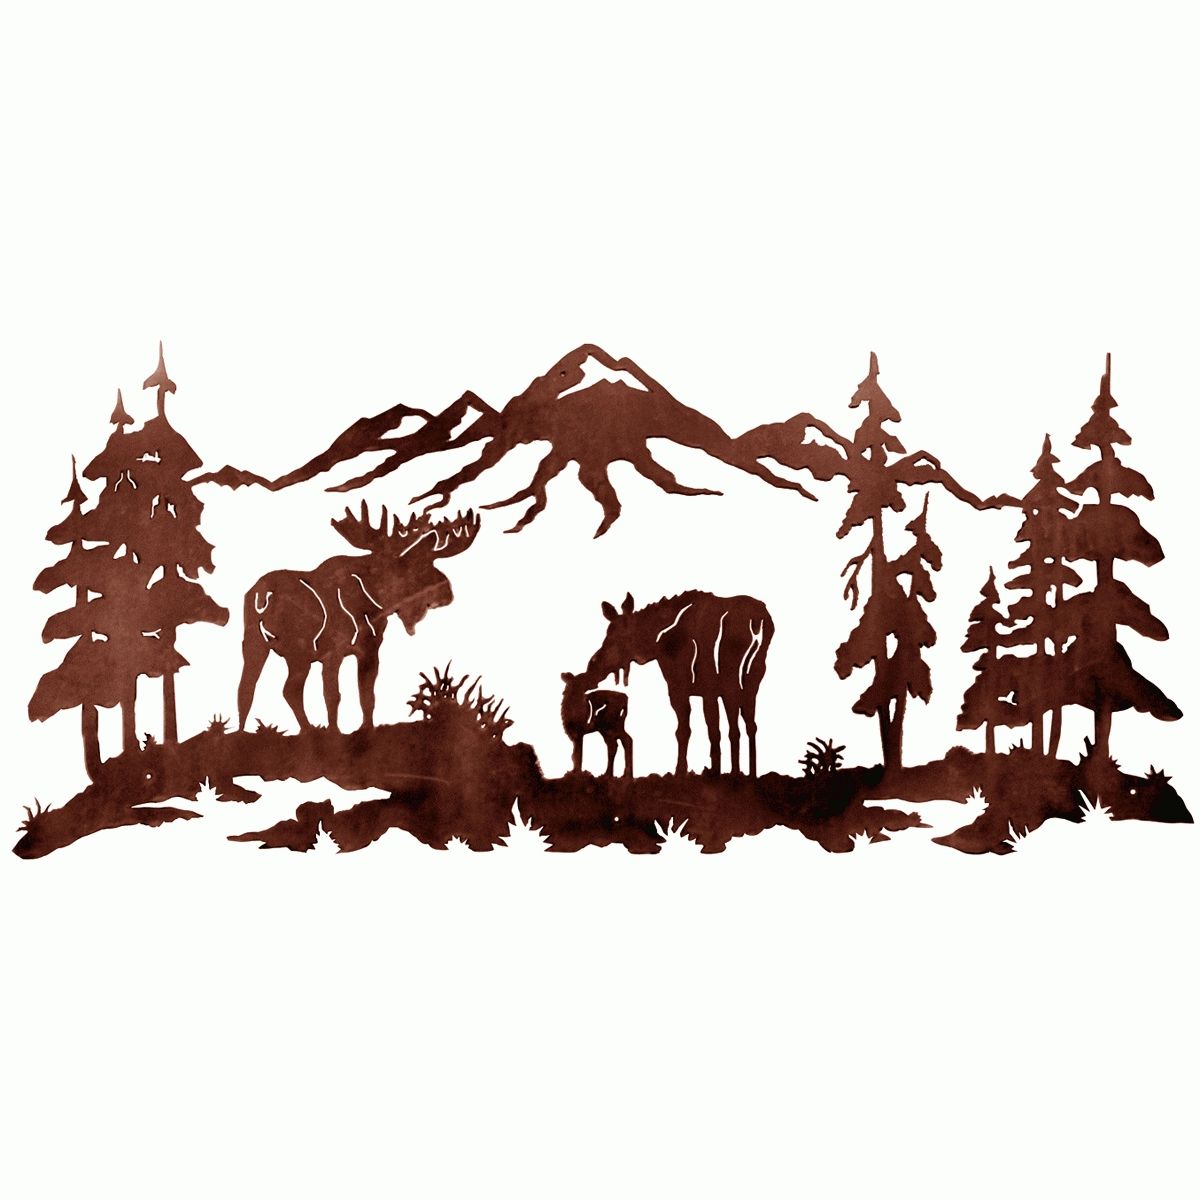 Moose Family Metal Wall Art Intended For 2018 Wildlife Metal Wall Art (View 5 of 20)